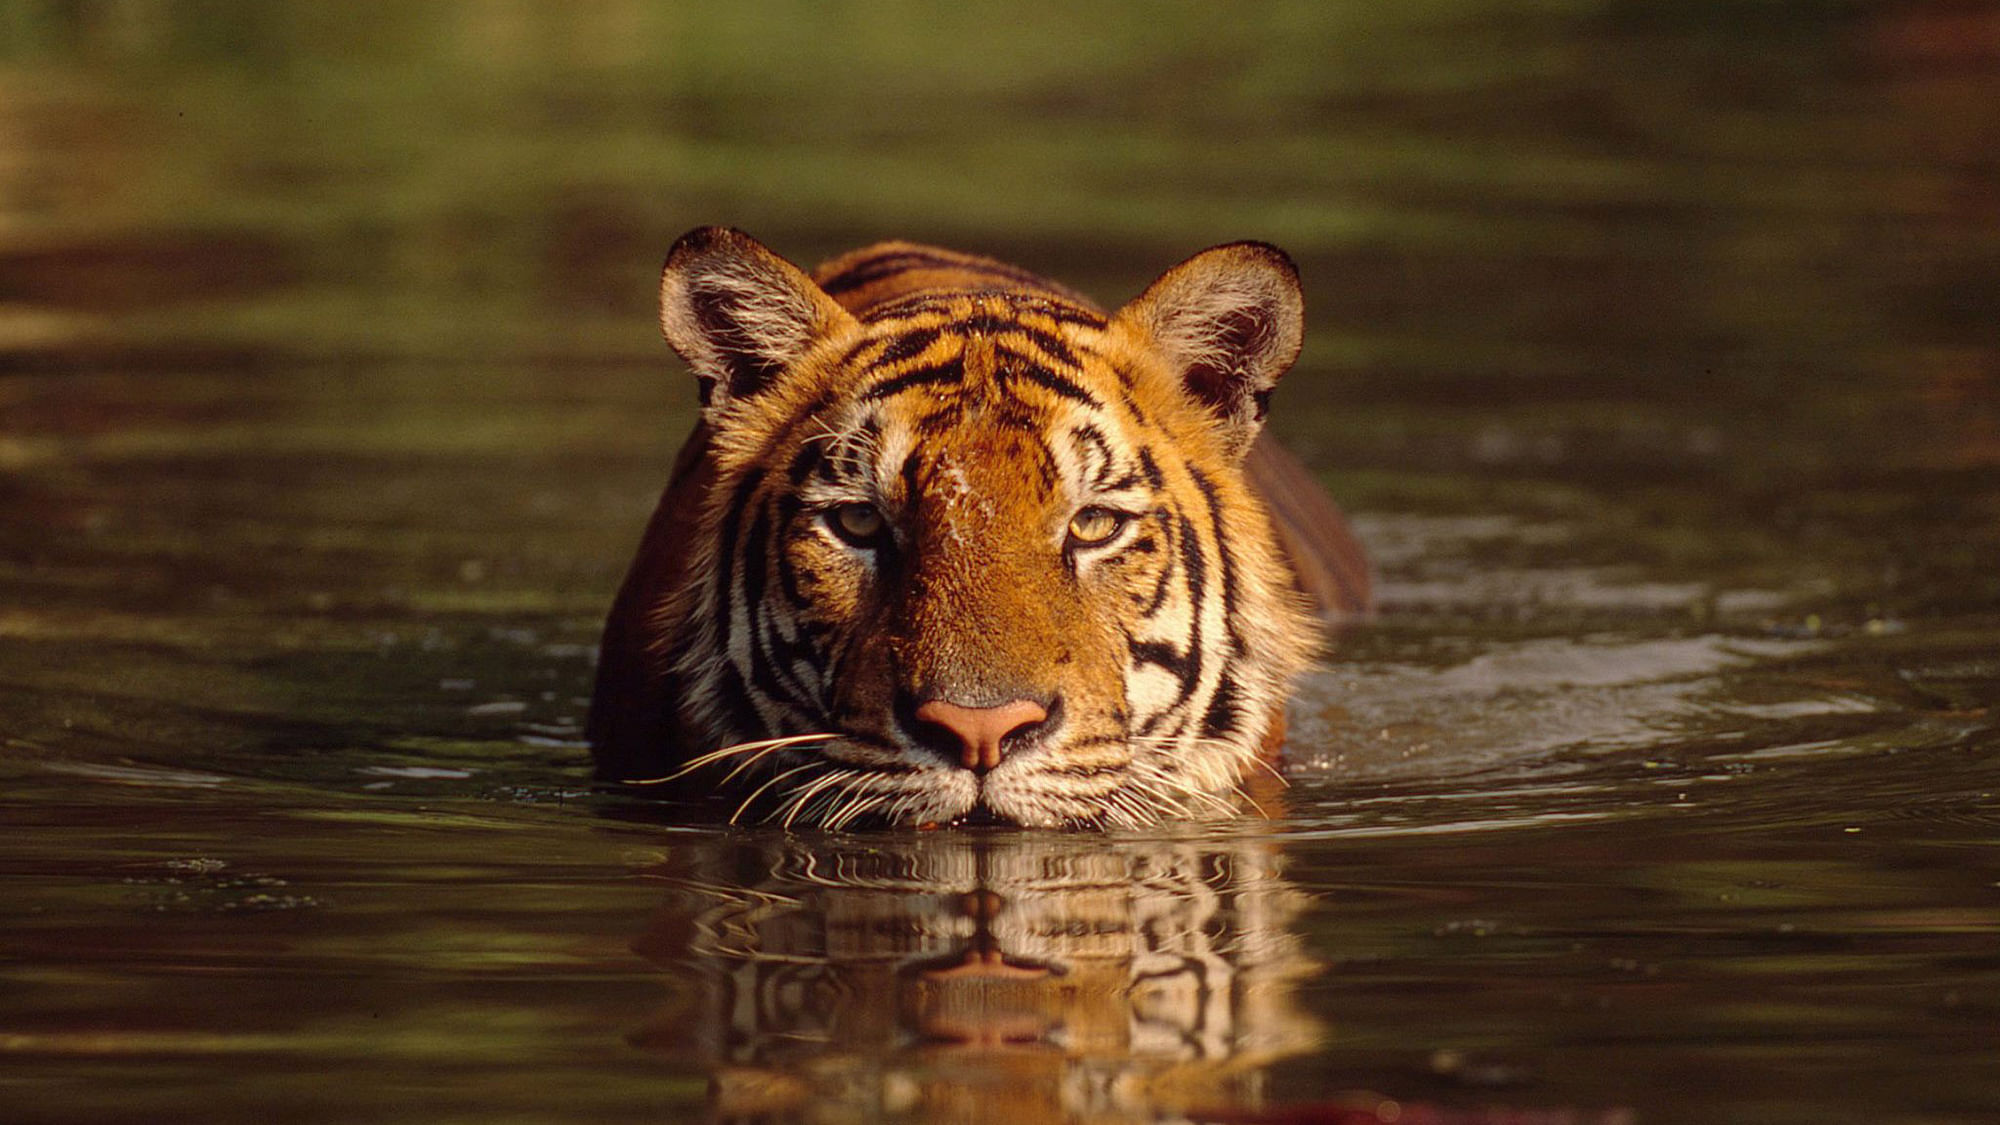 The last known tiger in Cambodia was reported in 2007. (Photo: iStock)